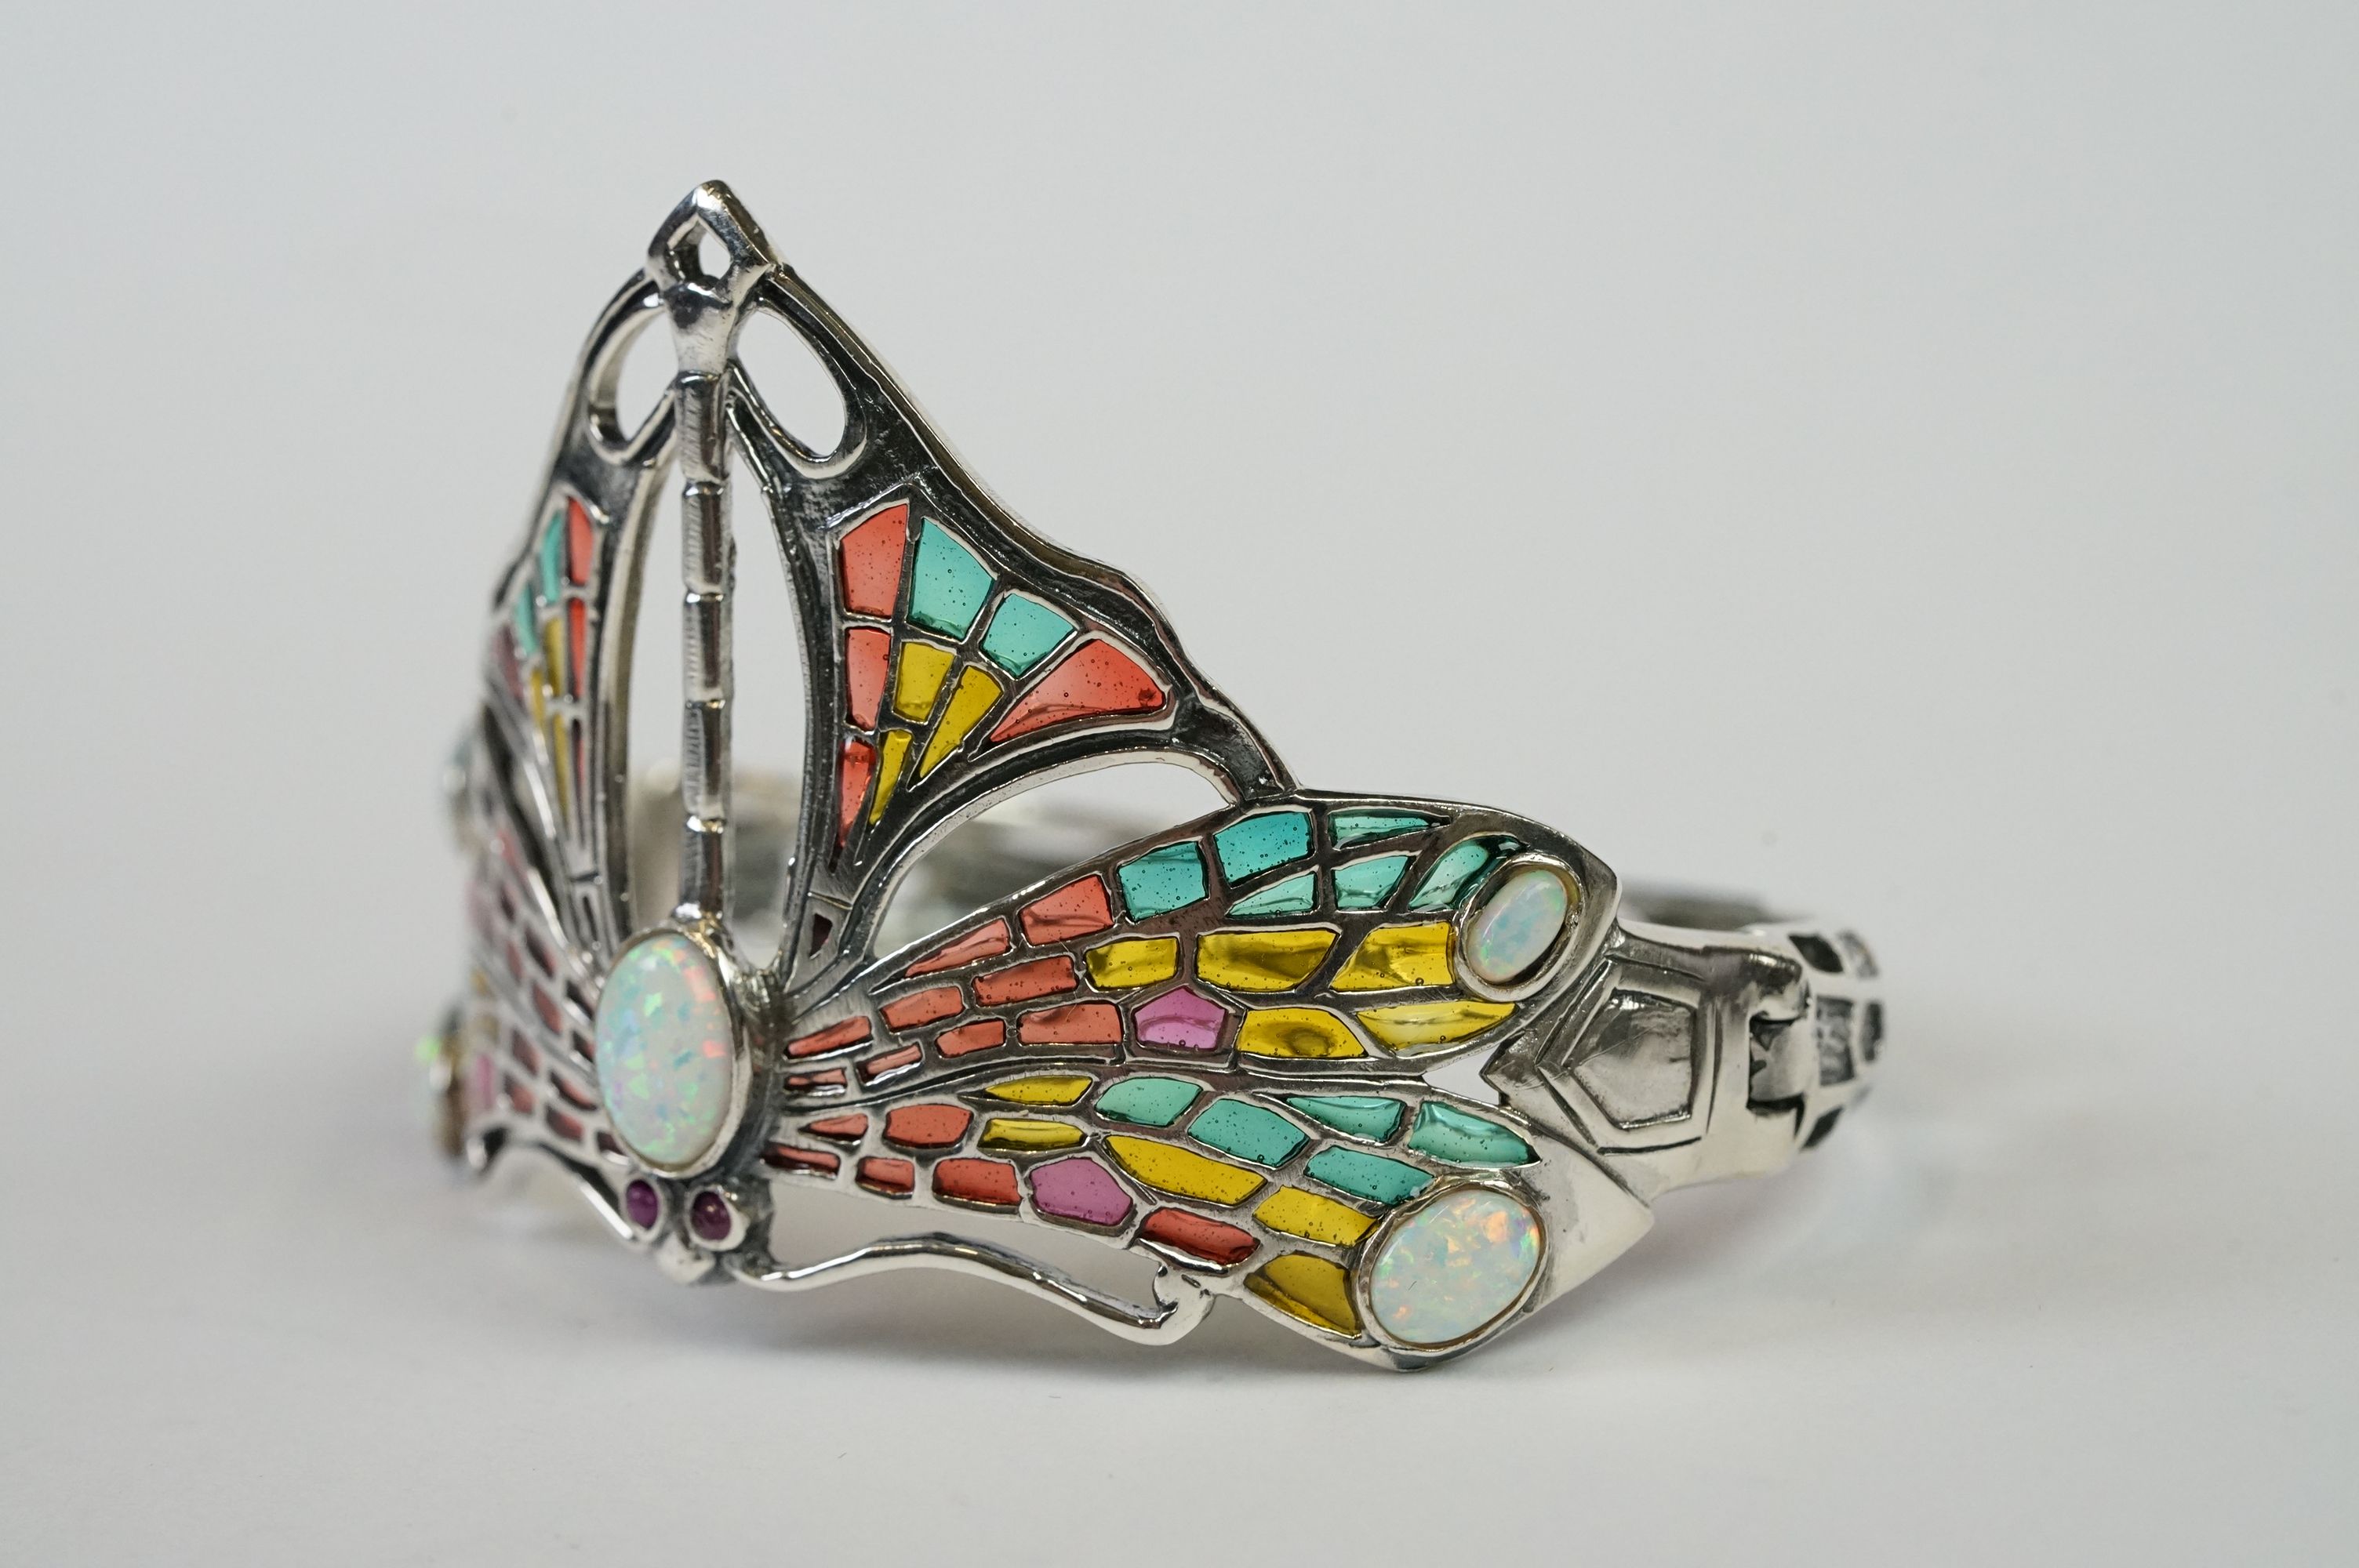 Large Silver Plique a Jour Cuff Bangle in the Art Deco style with opal cabochons - Image 3 of 11